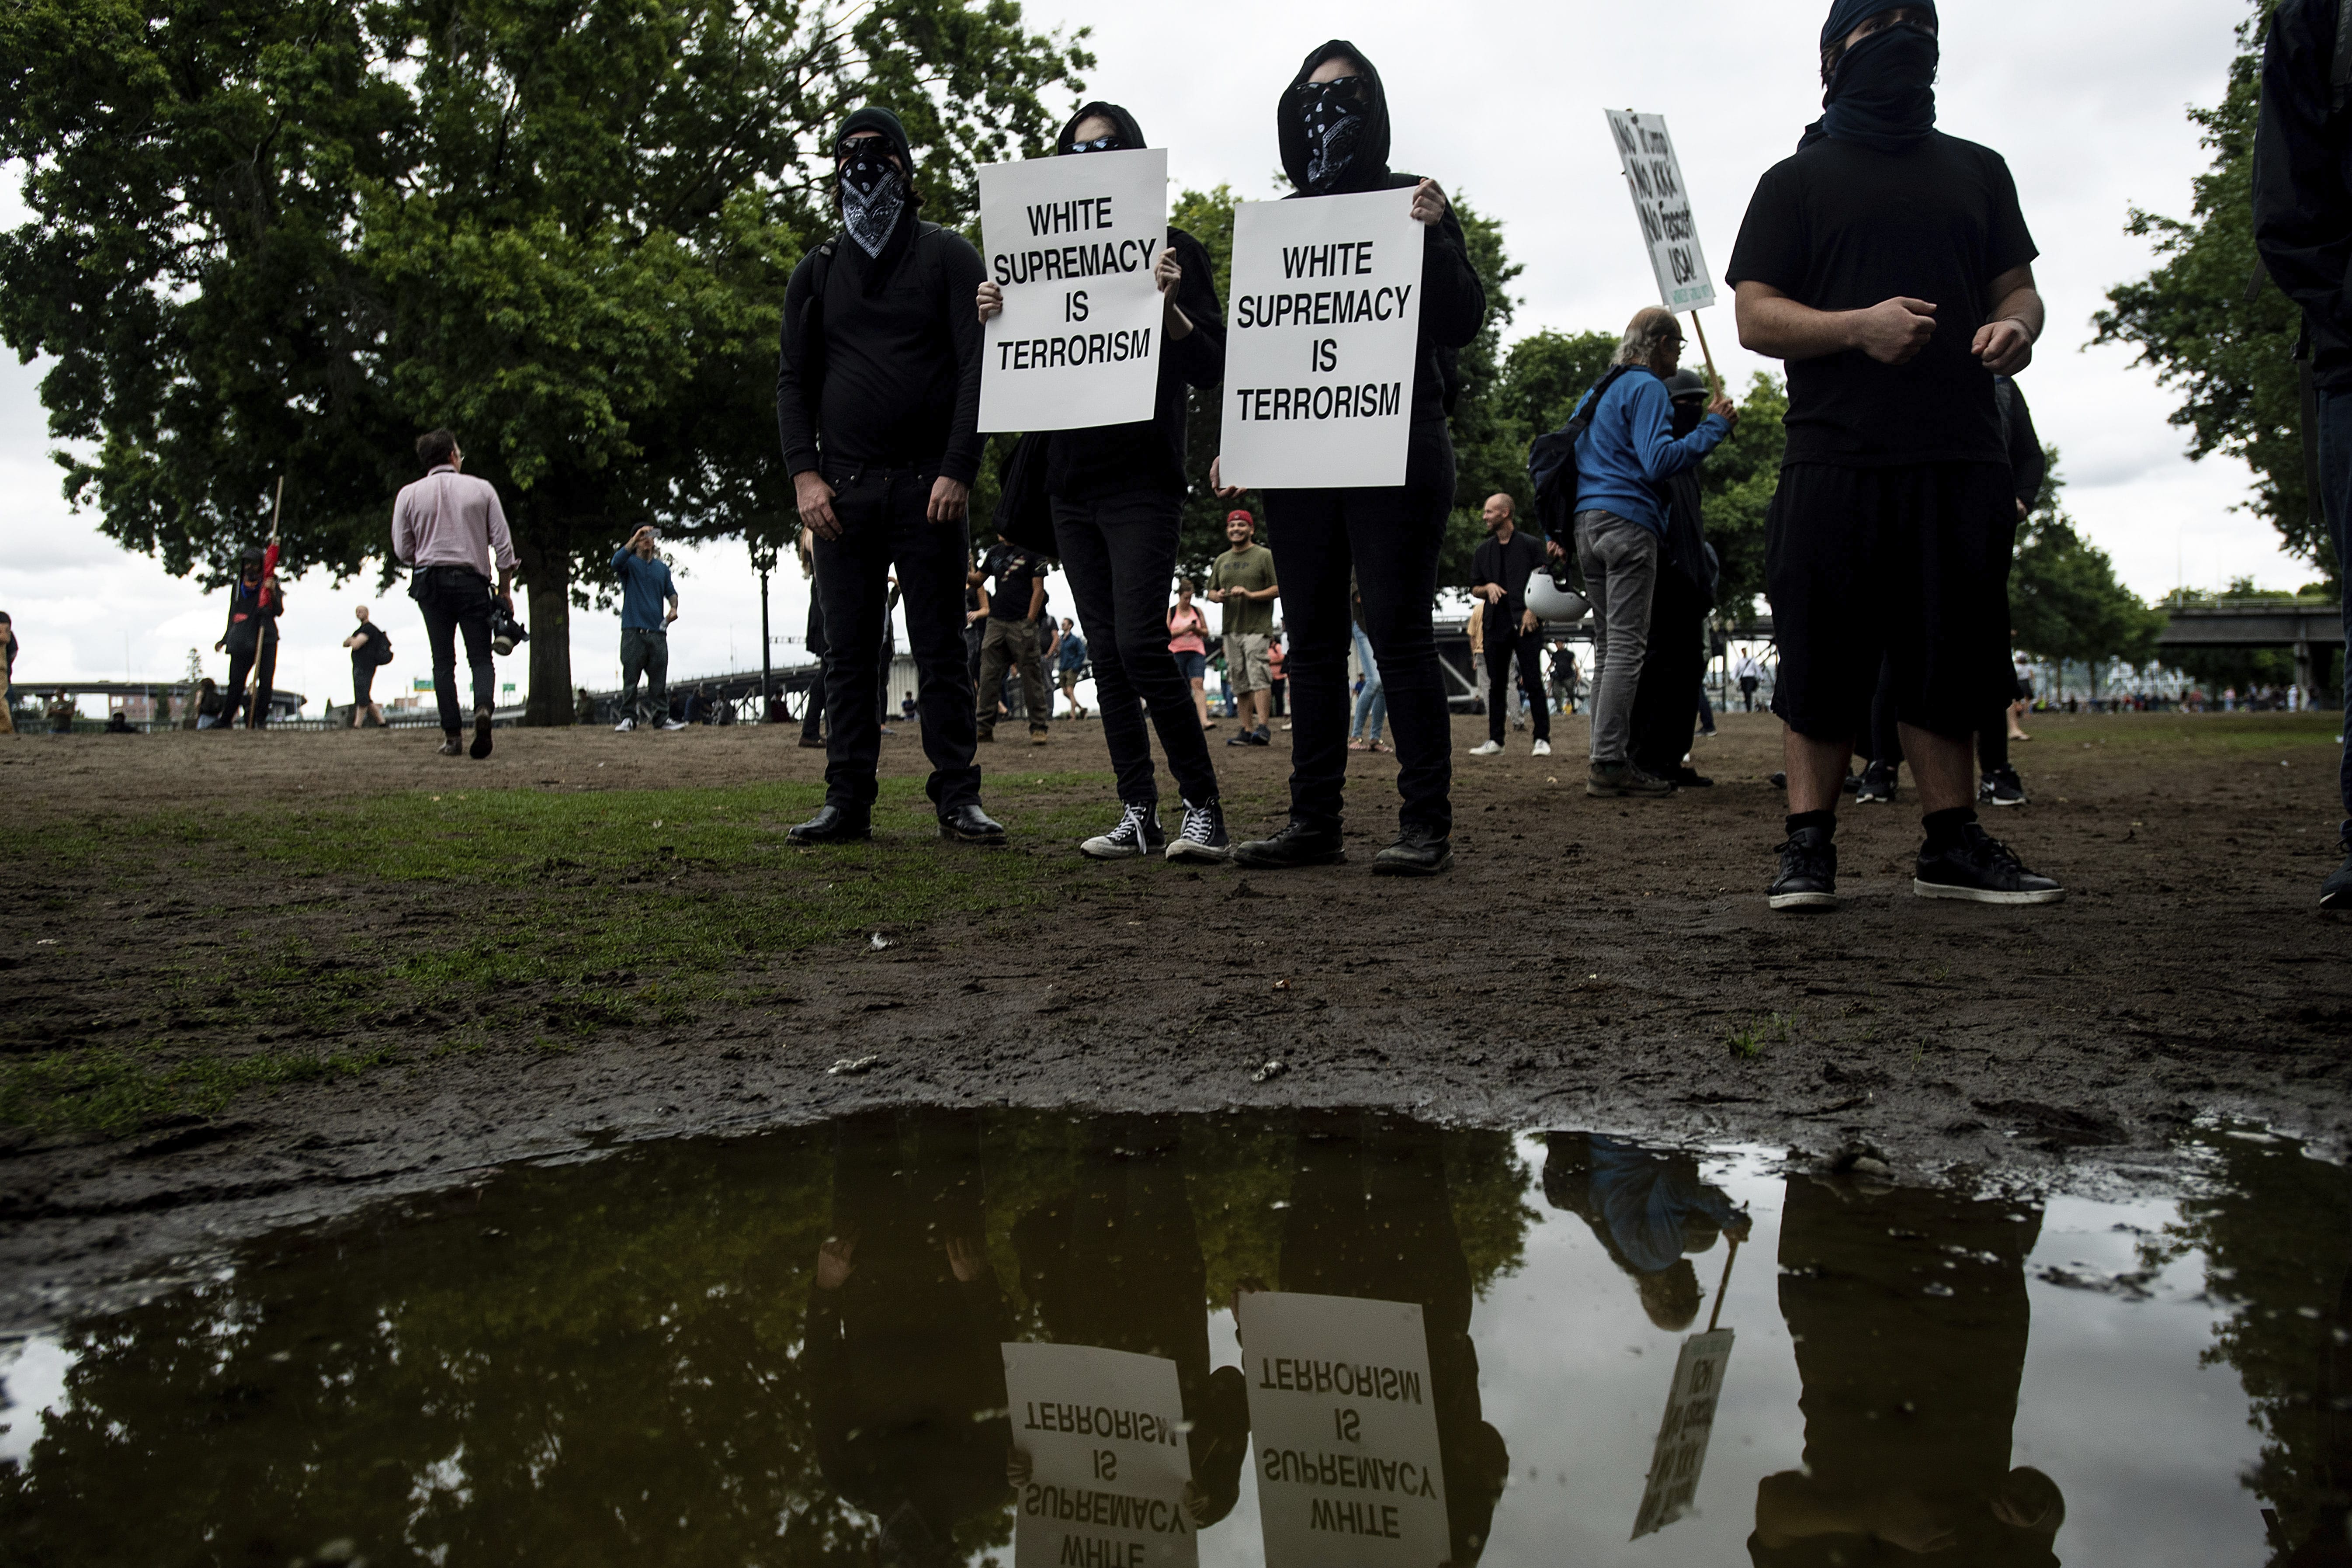 Black-clad protesters, gathered to oppose conservative groups staging an "End Domestic Terrorism" rally, hold signs in Portland, Ore., on Saturday, Aug. 17, 2019. Police have mobilized to prevent clashes between conservative groups and counter-protesters who plan to converge in the city.